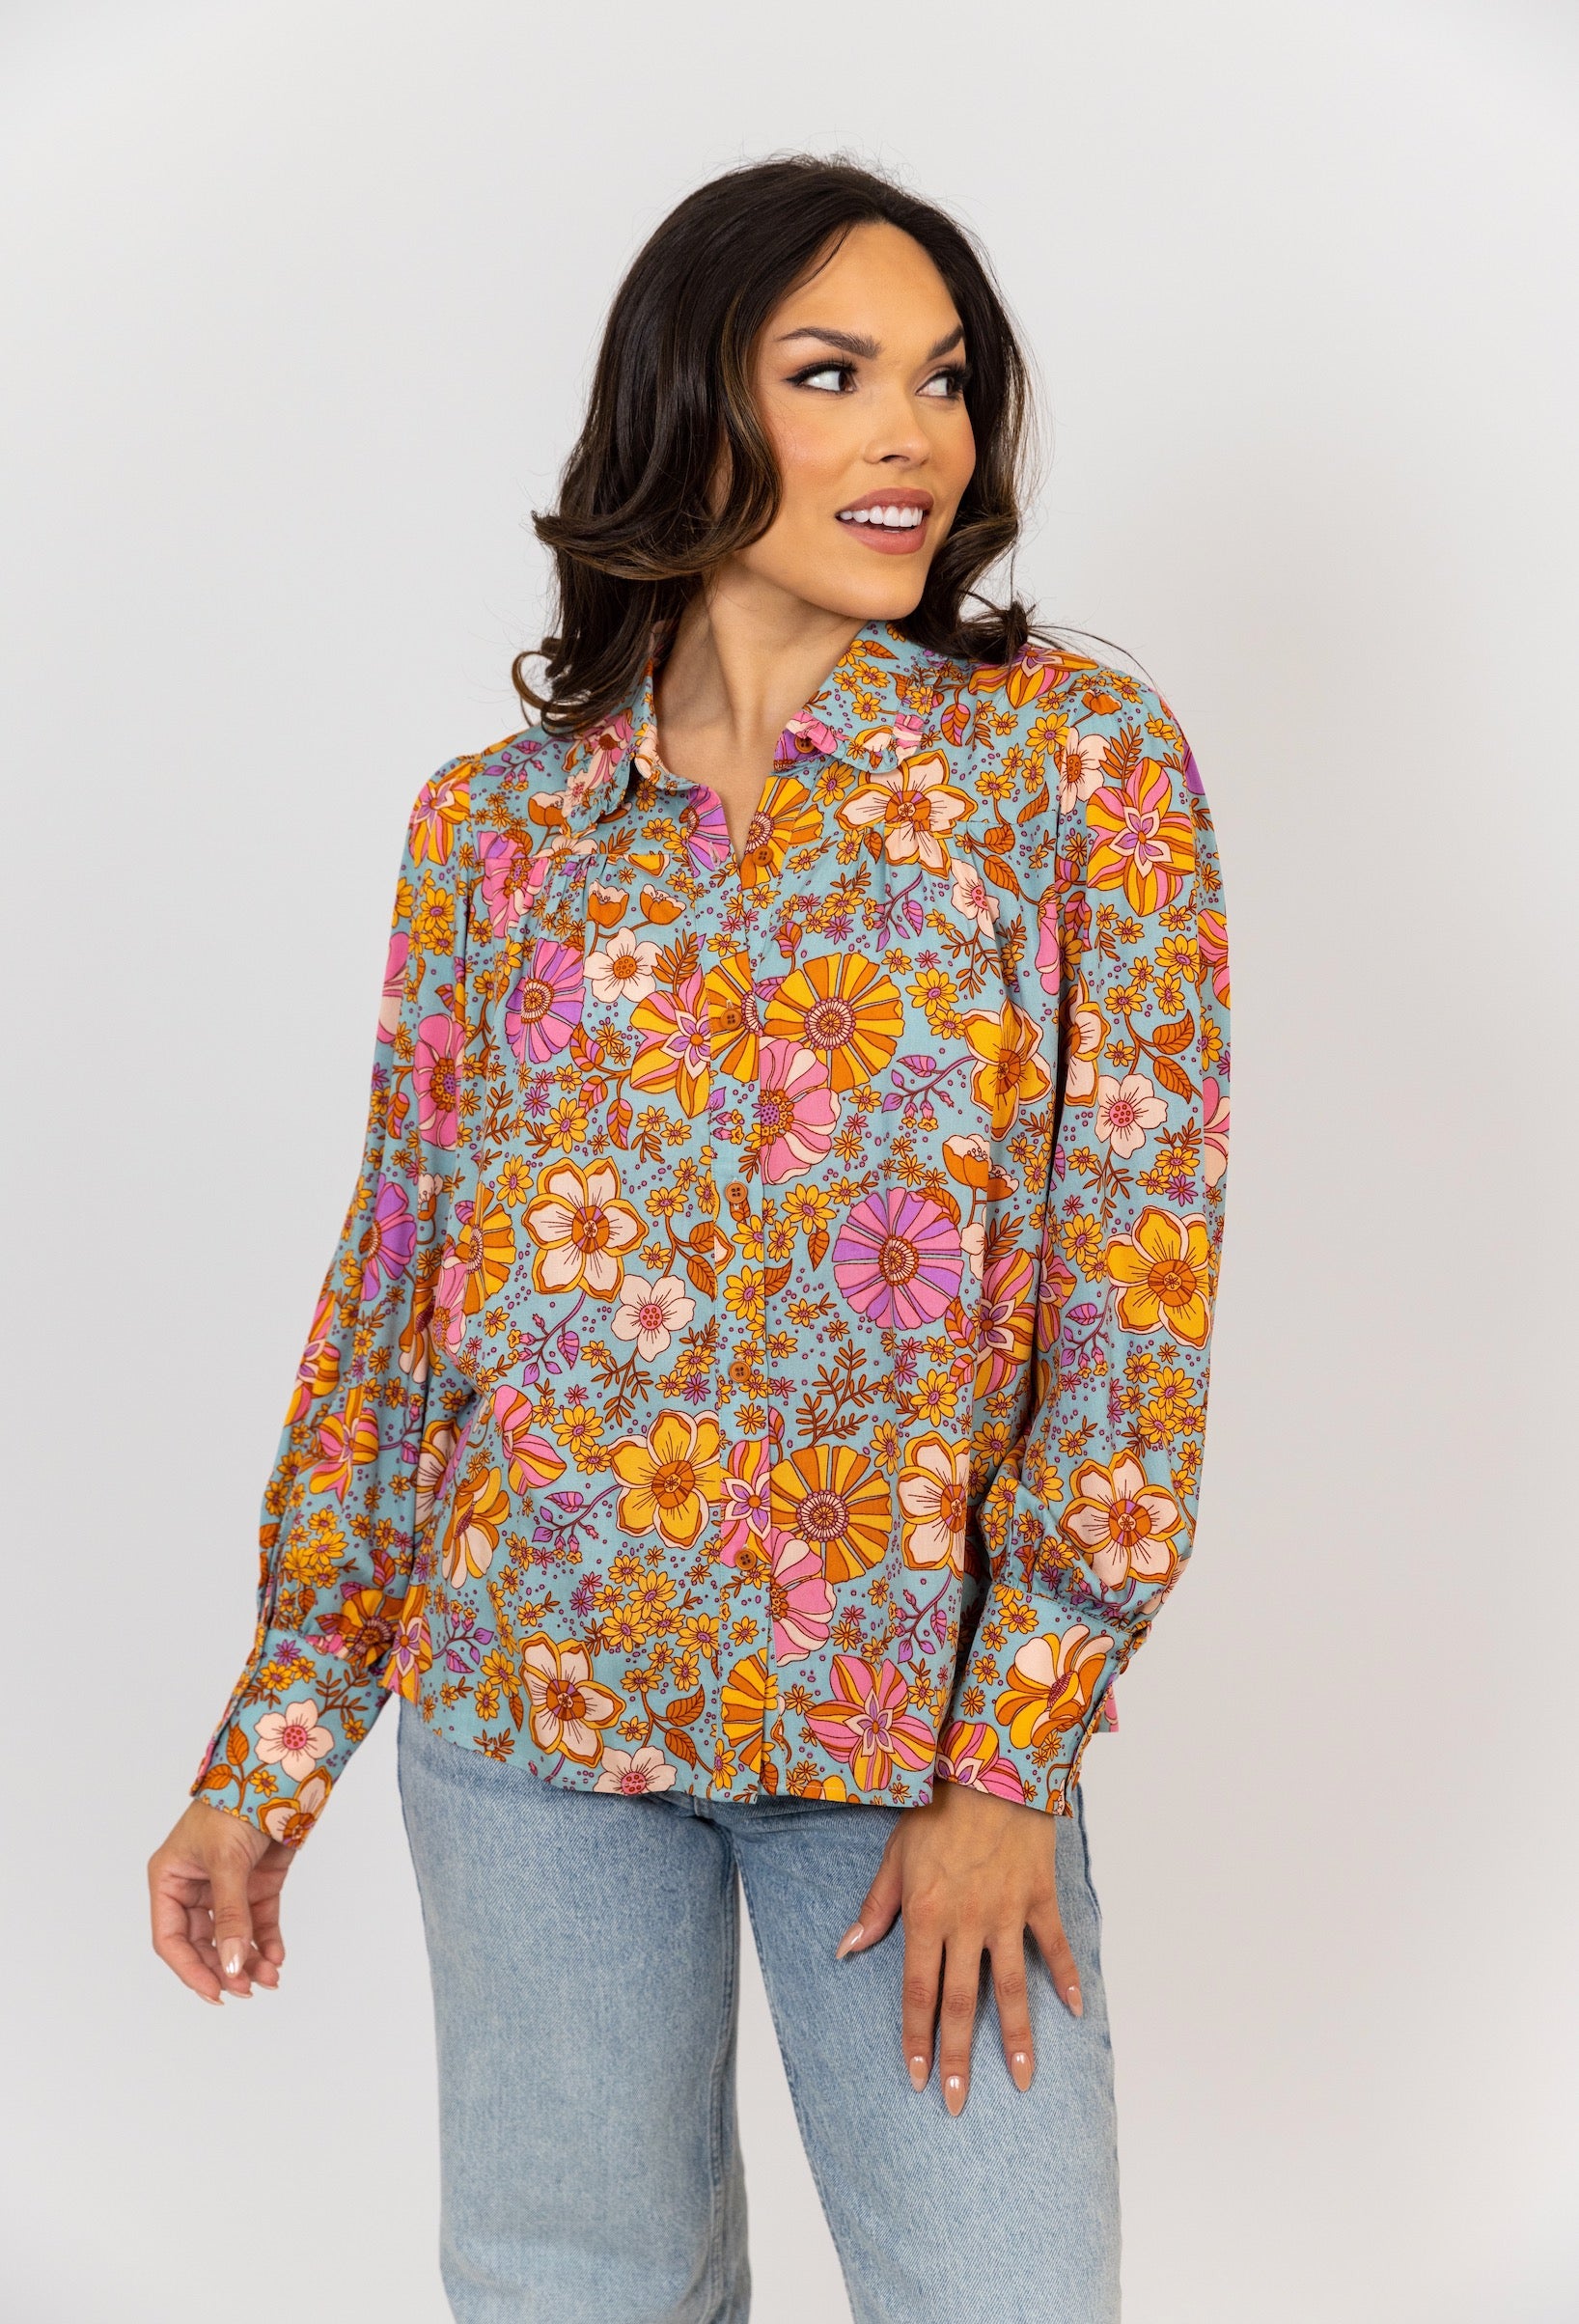 This Floral Life Ruffle Blouse